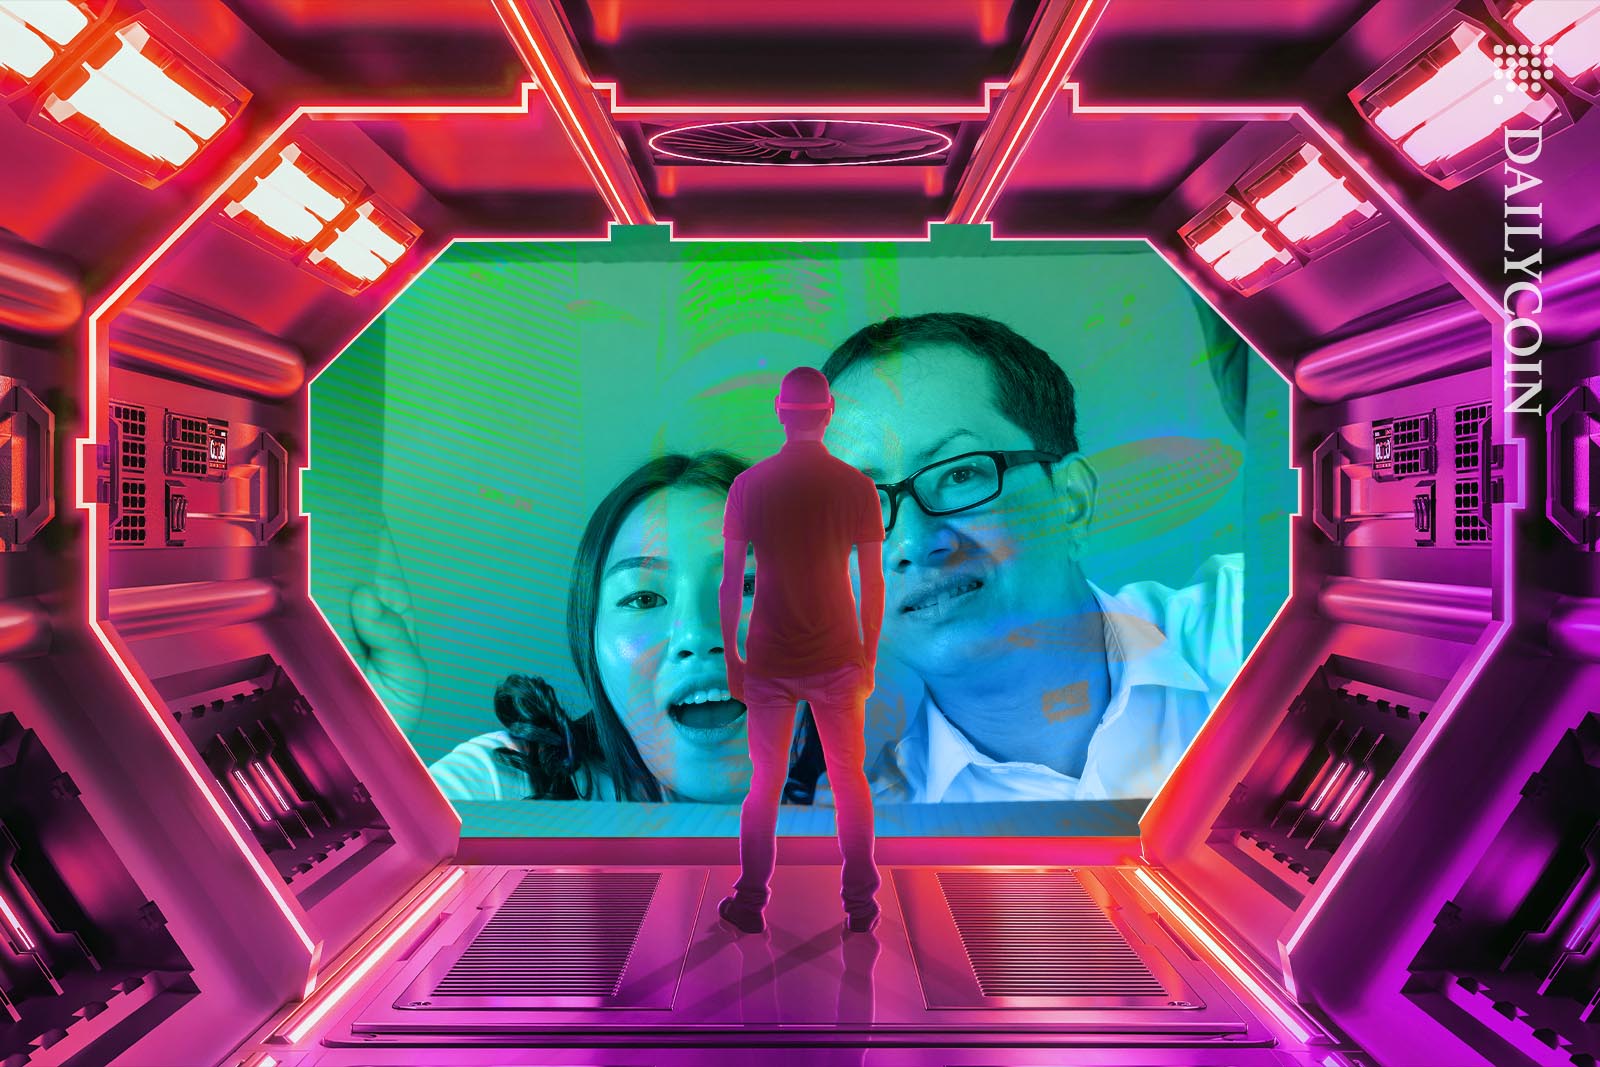 Chinese man and woman looking into a metaverse whilst a guy staring back at them from there.